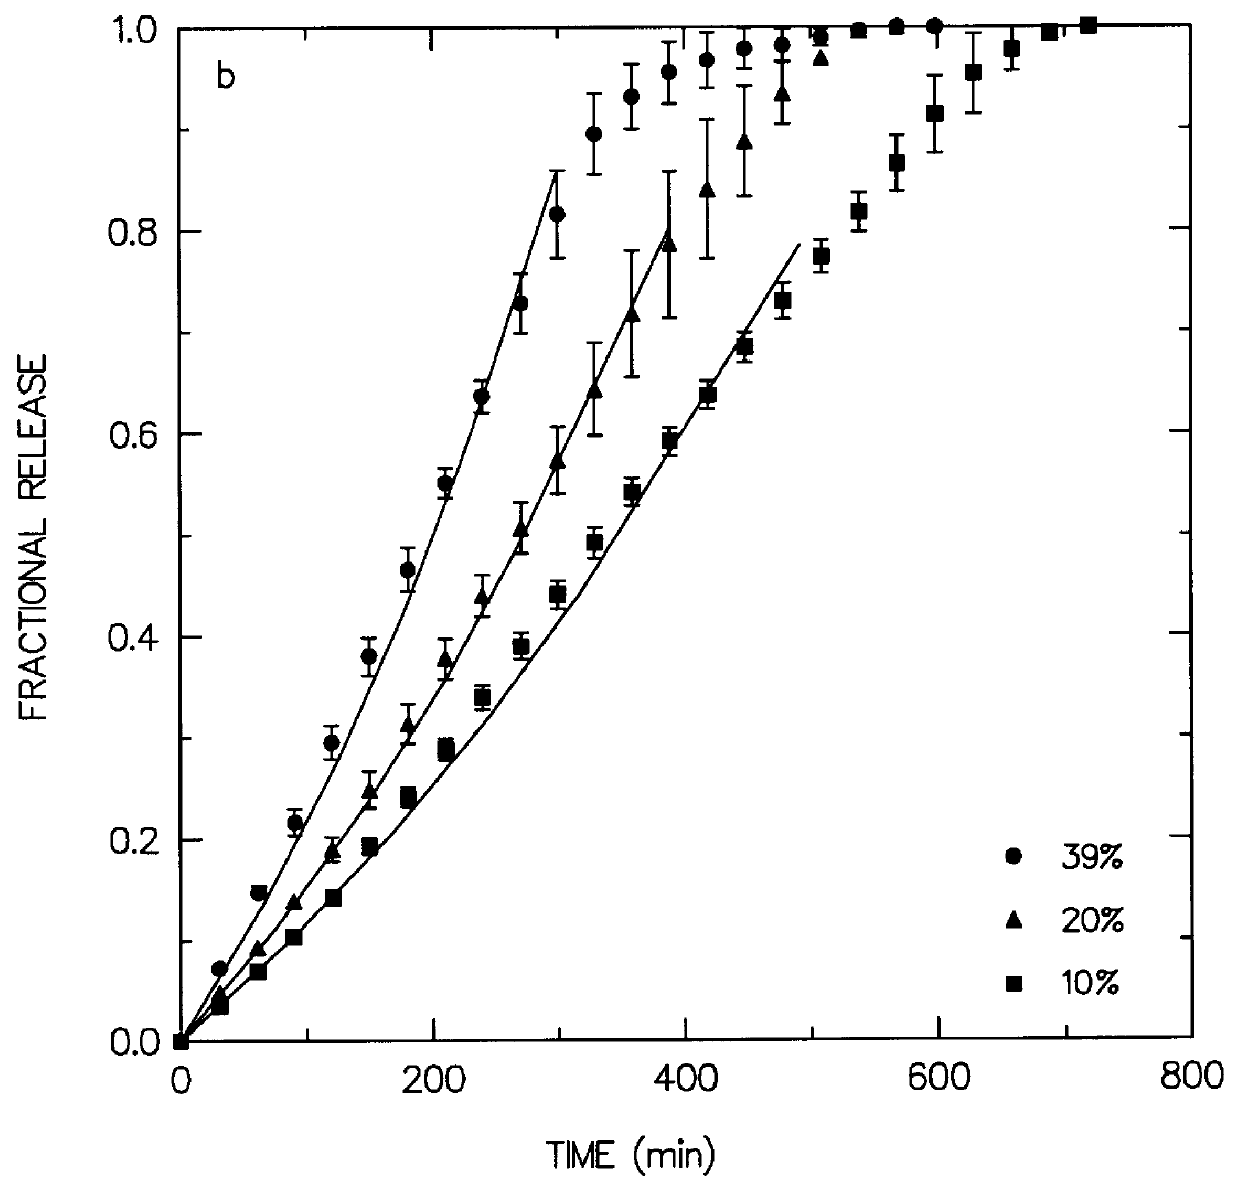 Coated tablet with long term parabolic and zero-order release kinetics